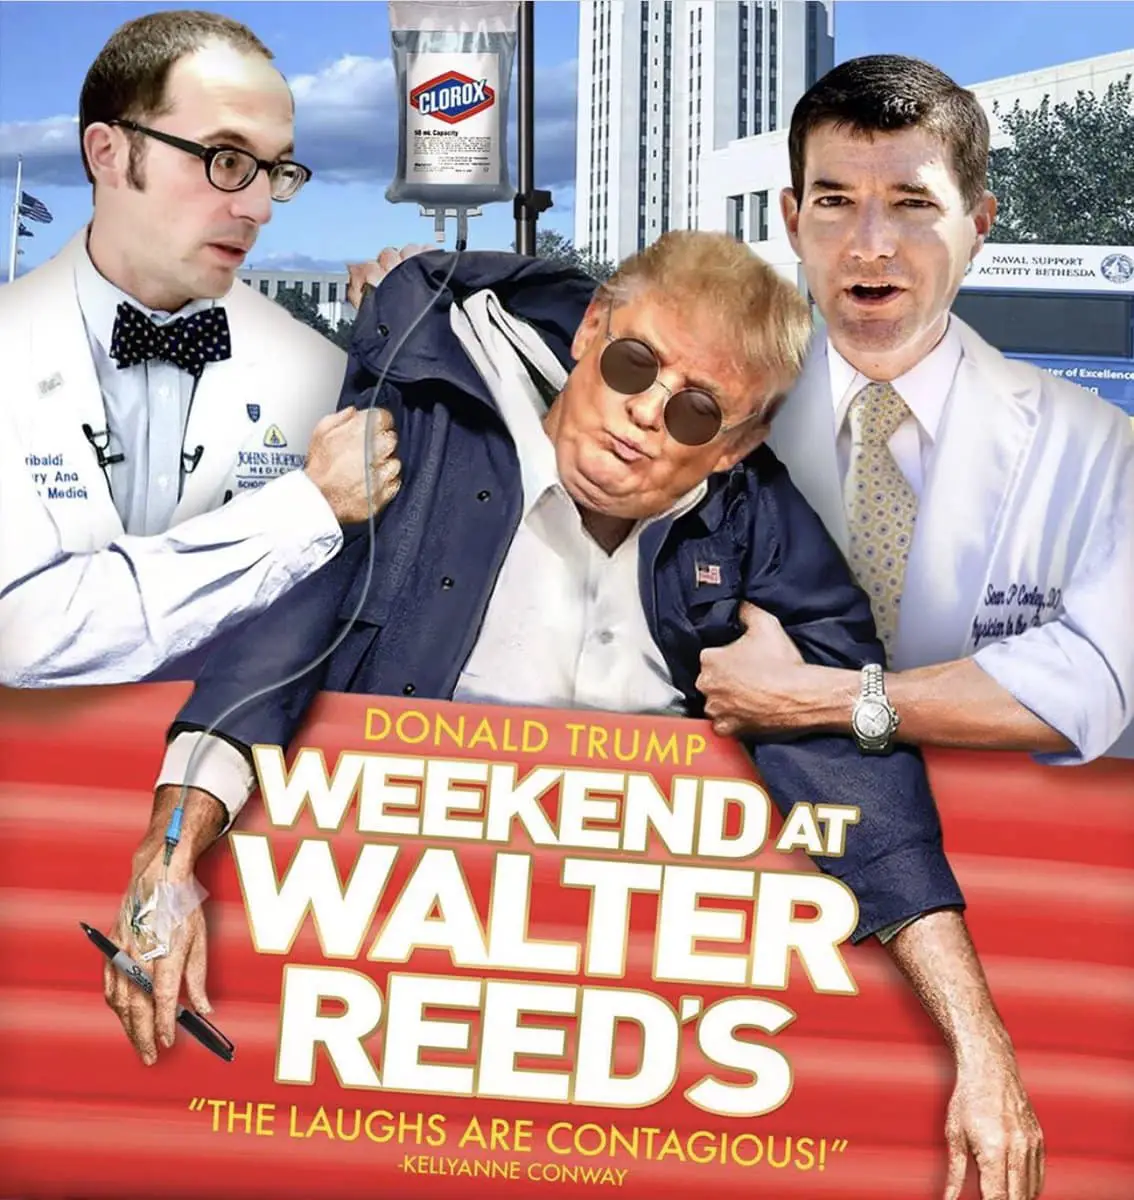 Donald Trump in Weekend at Walter Reed